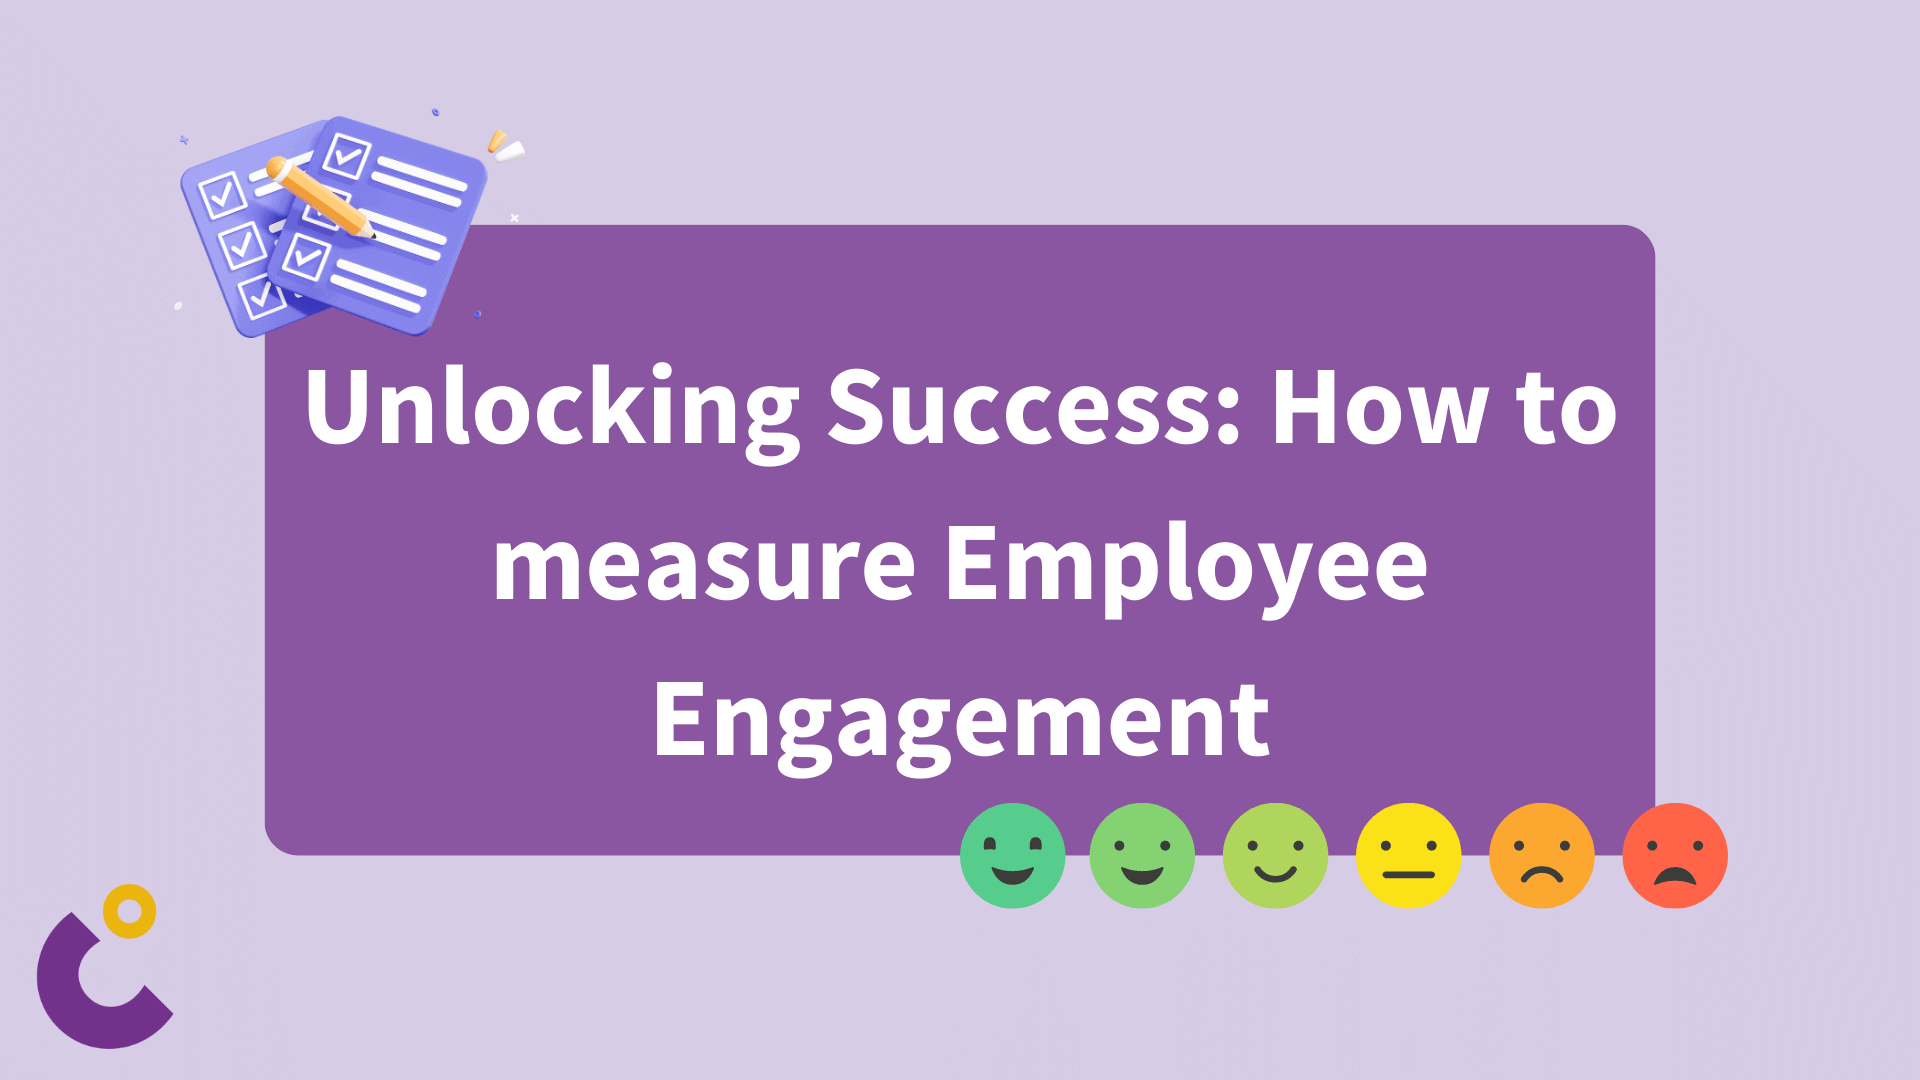 Unlocking Success: How to measure Employee Engagement